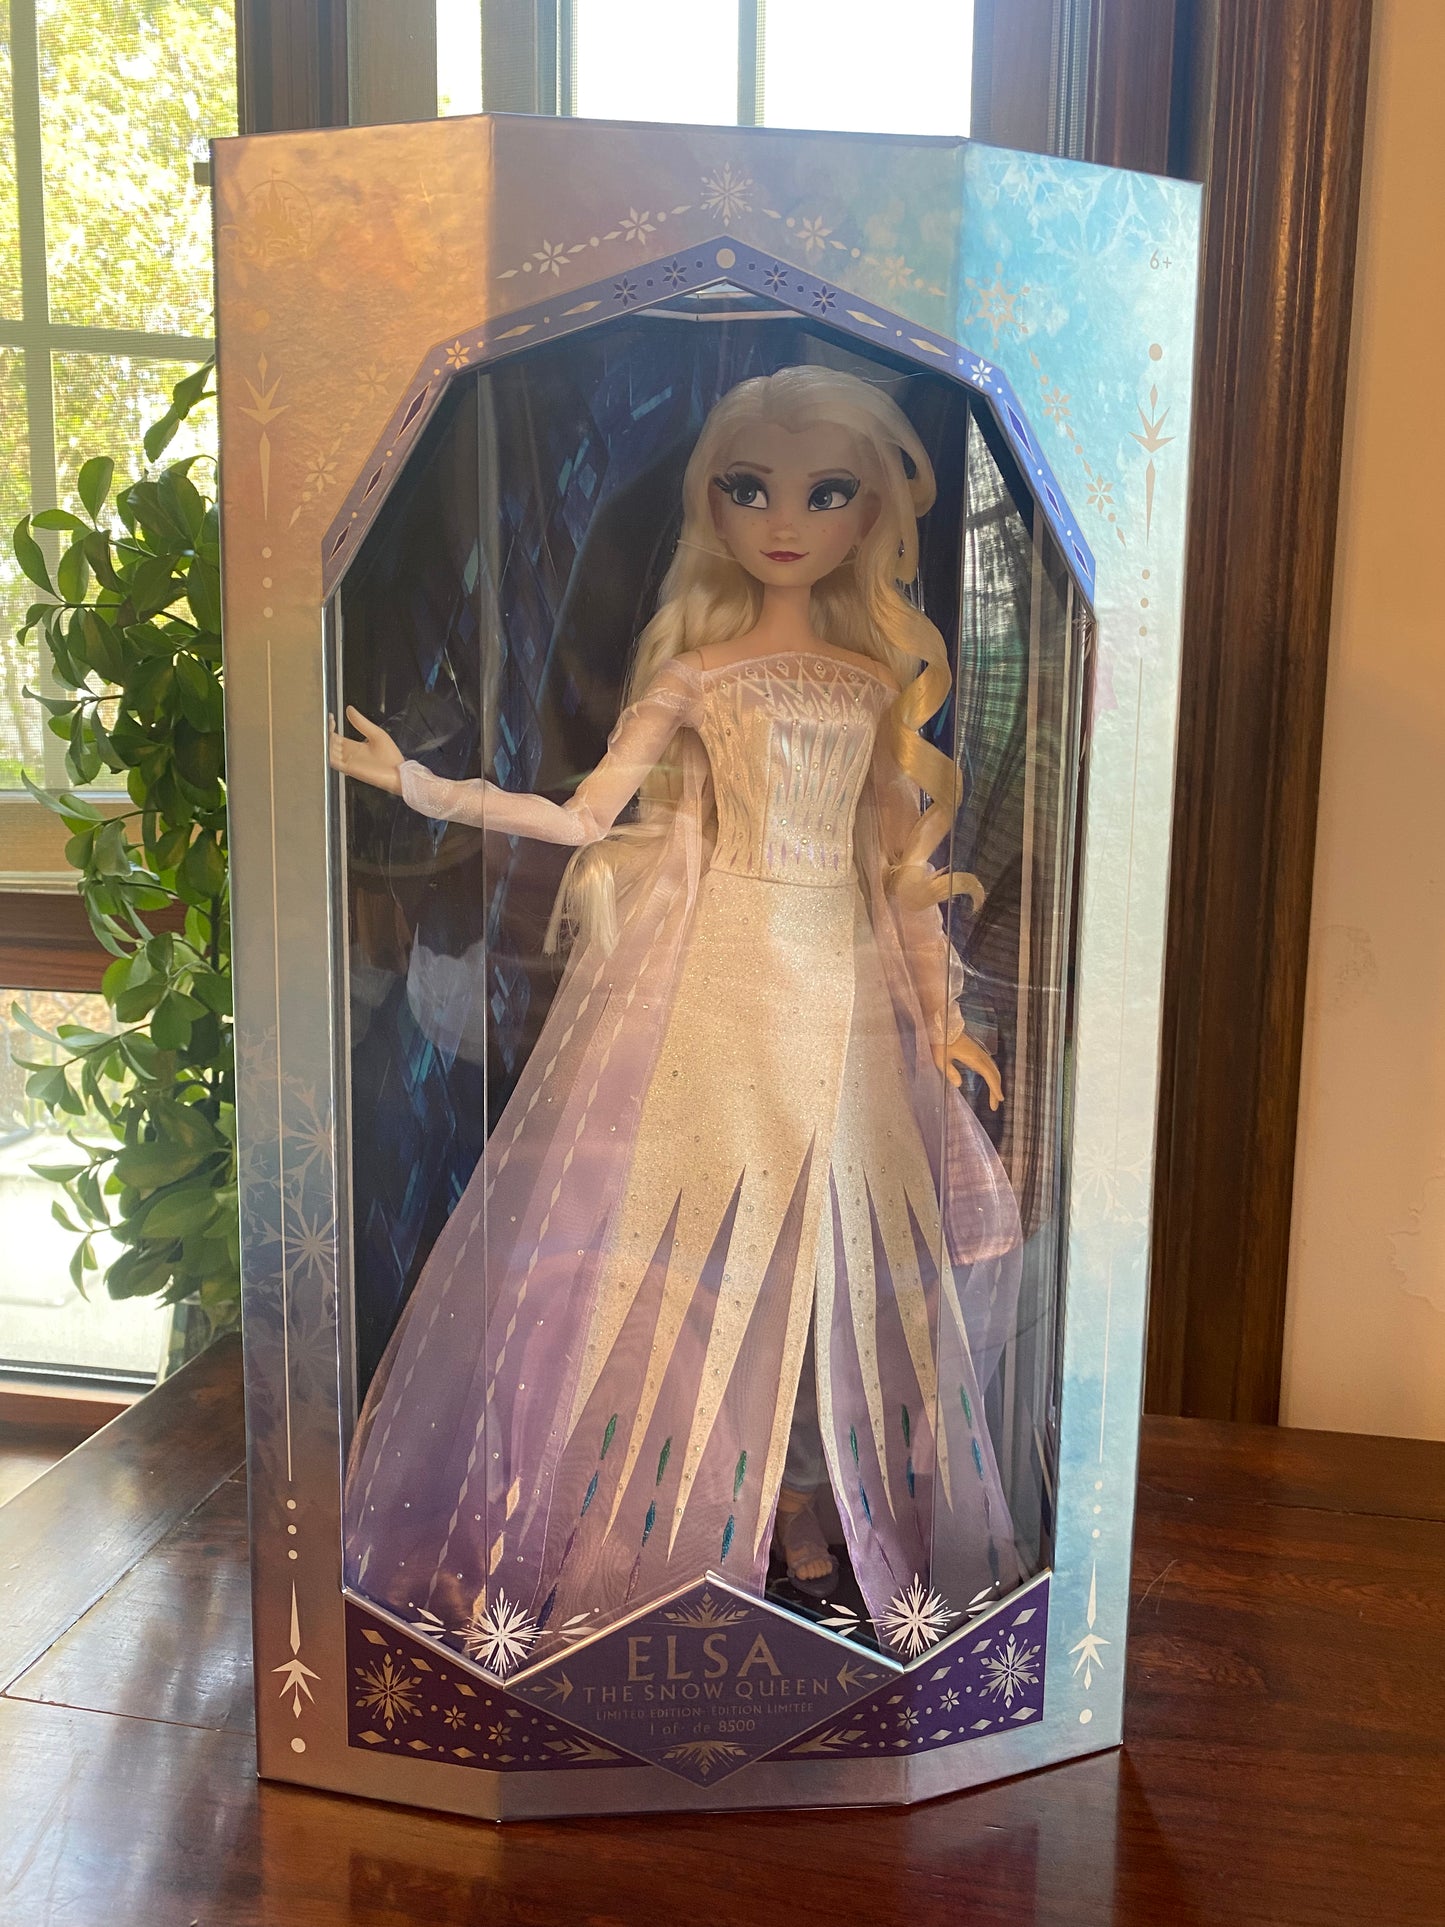 Disney Elsa Snow Queen Frozen 2 Doll Limited Edition 17" Doll Store exclusive